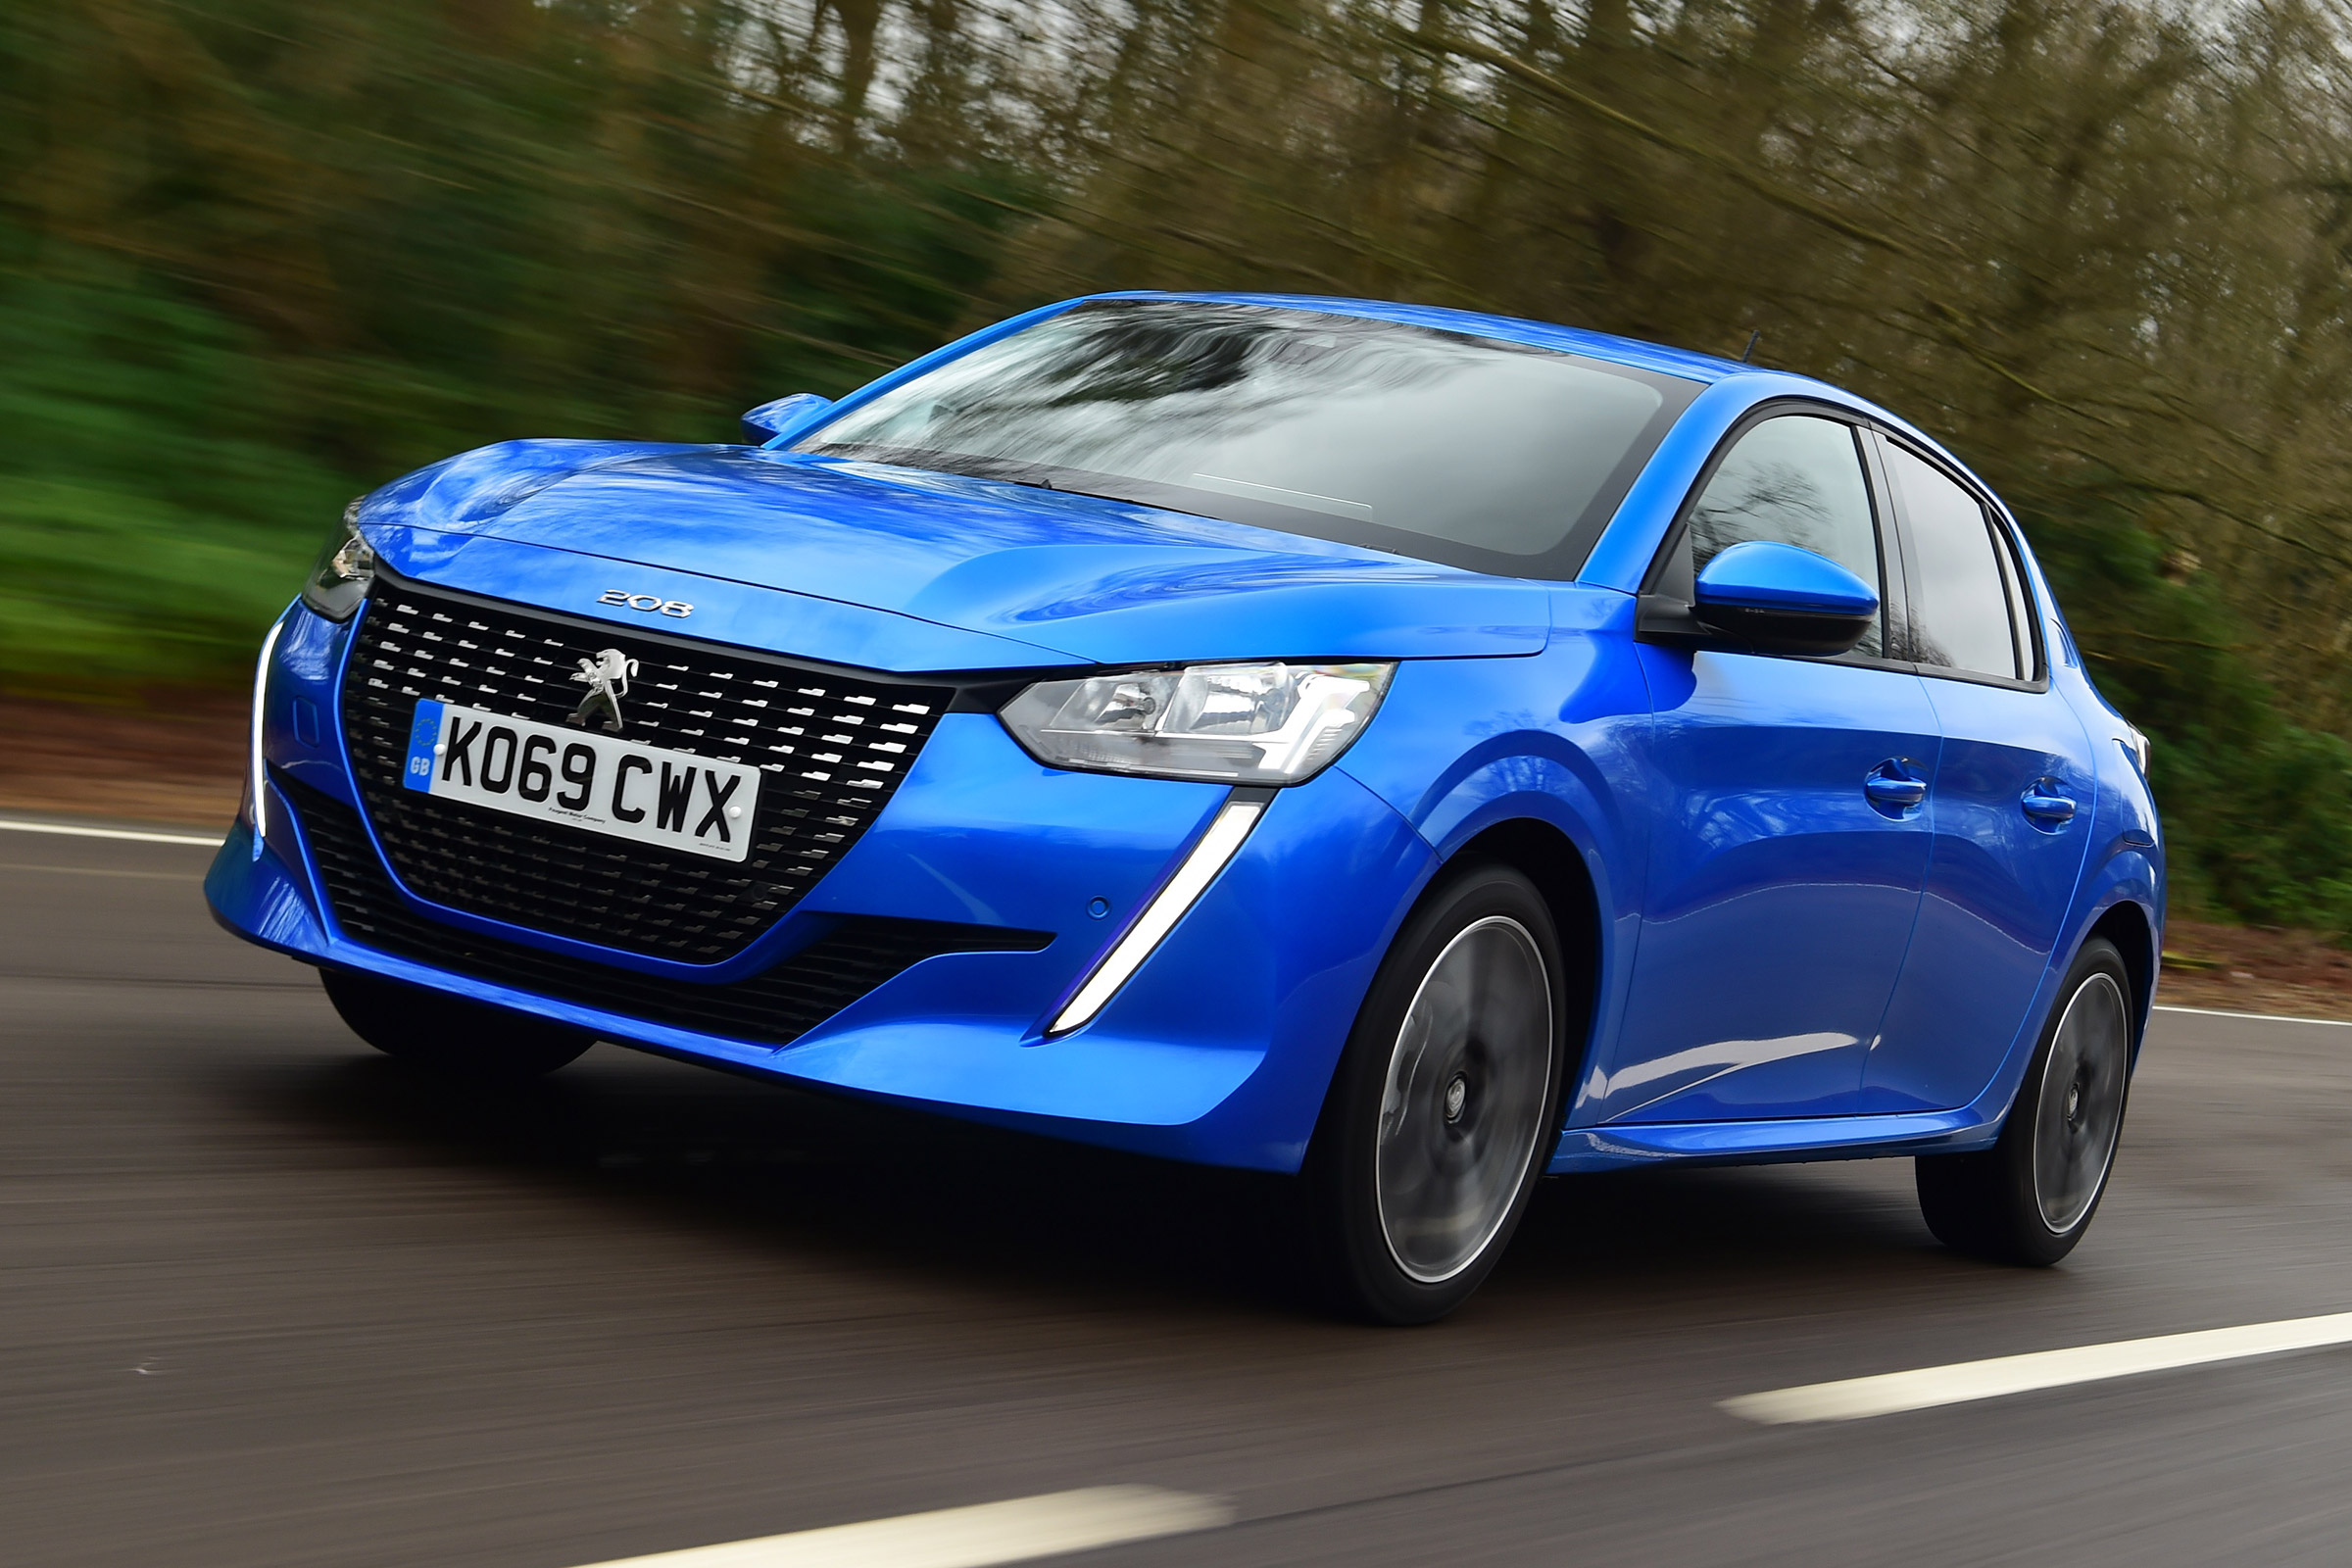 2023 Peugeot 208: Here's What We Expect From The Updated Small